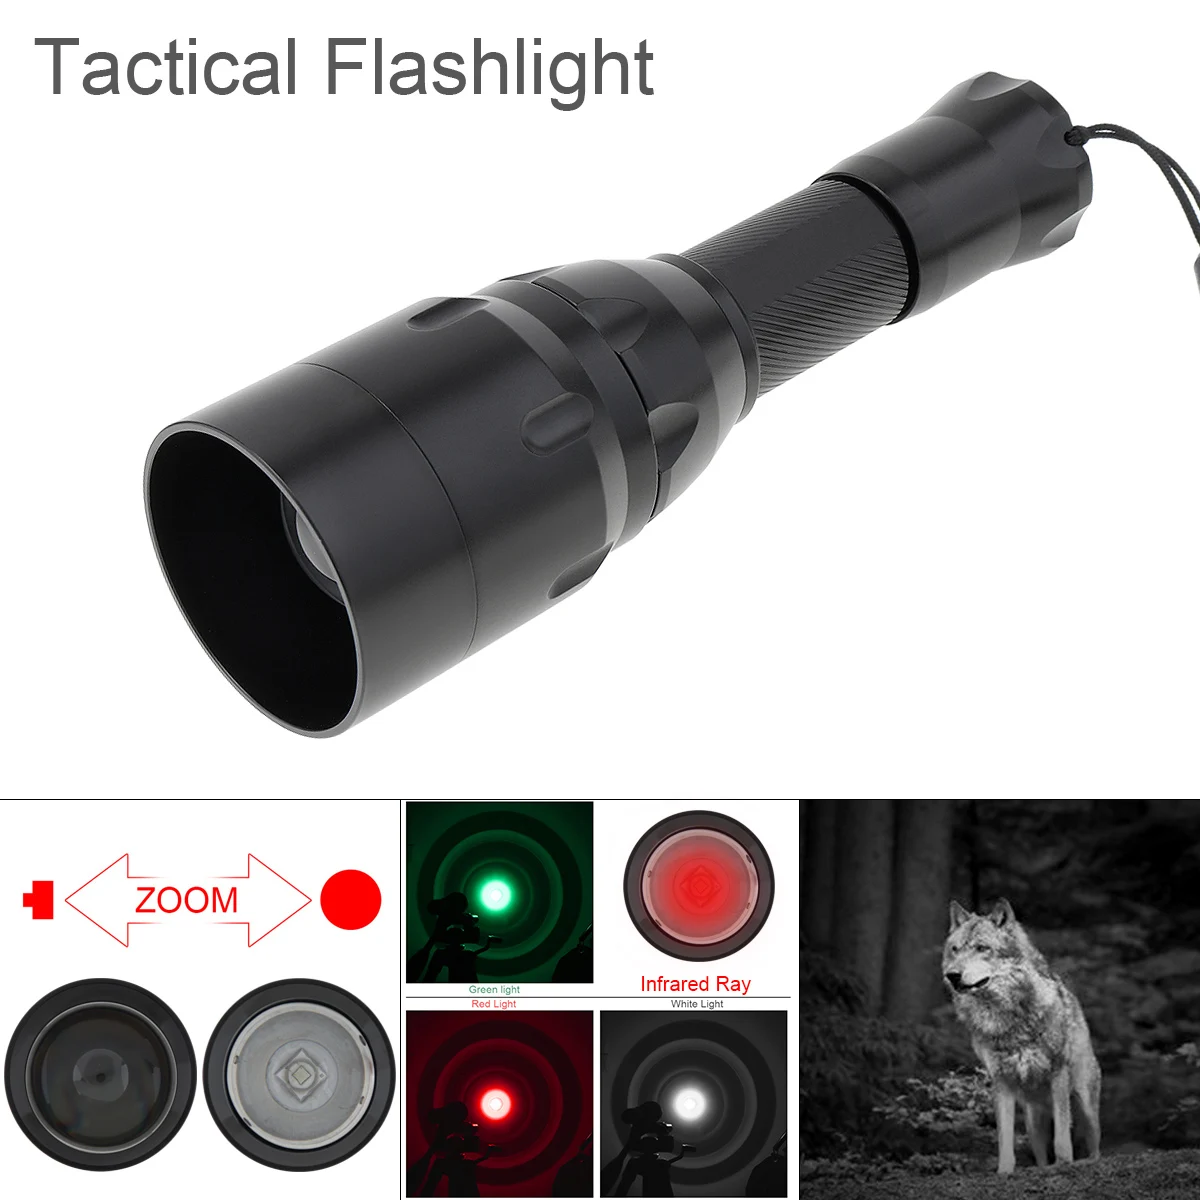 C16 Zoomable LED Flashlight Torch Lamp 1500Lm XPE Red Green White Infrared Light 850nm LED Tactical Flashlight for Hunting hunting light element tactical red laser torch ellm flashlight softair wapens arsoft armas surefir ir lamp flashlight for pistol